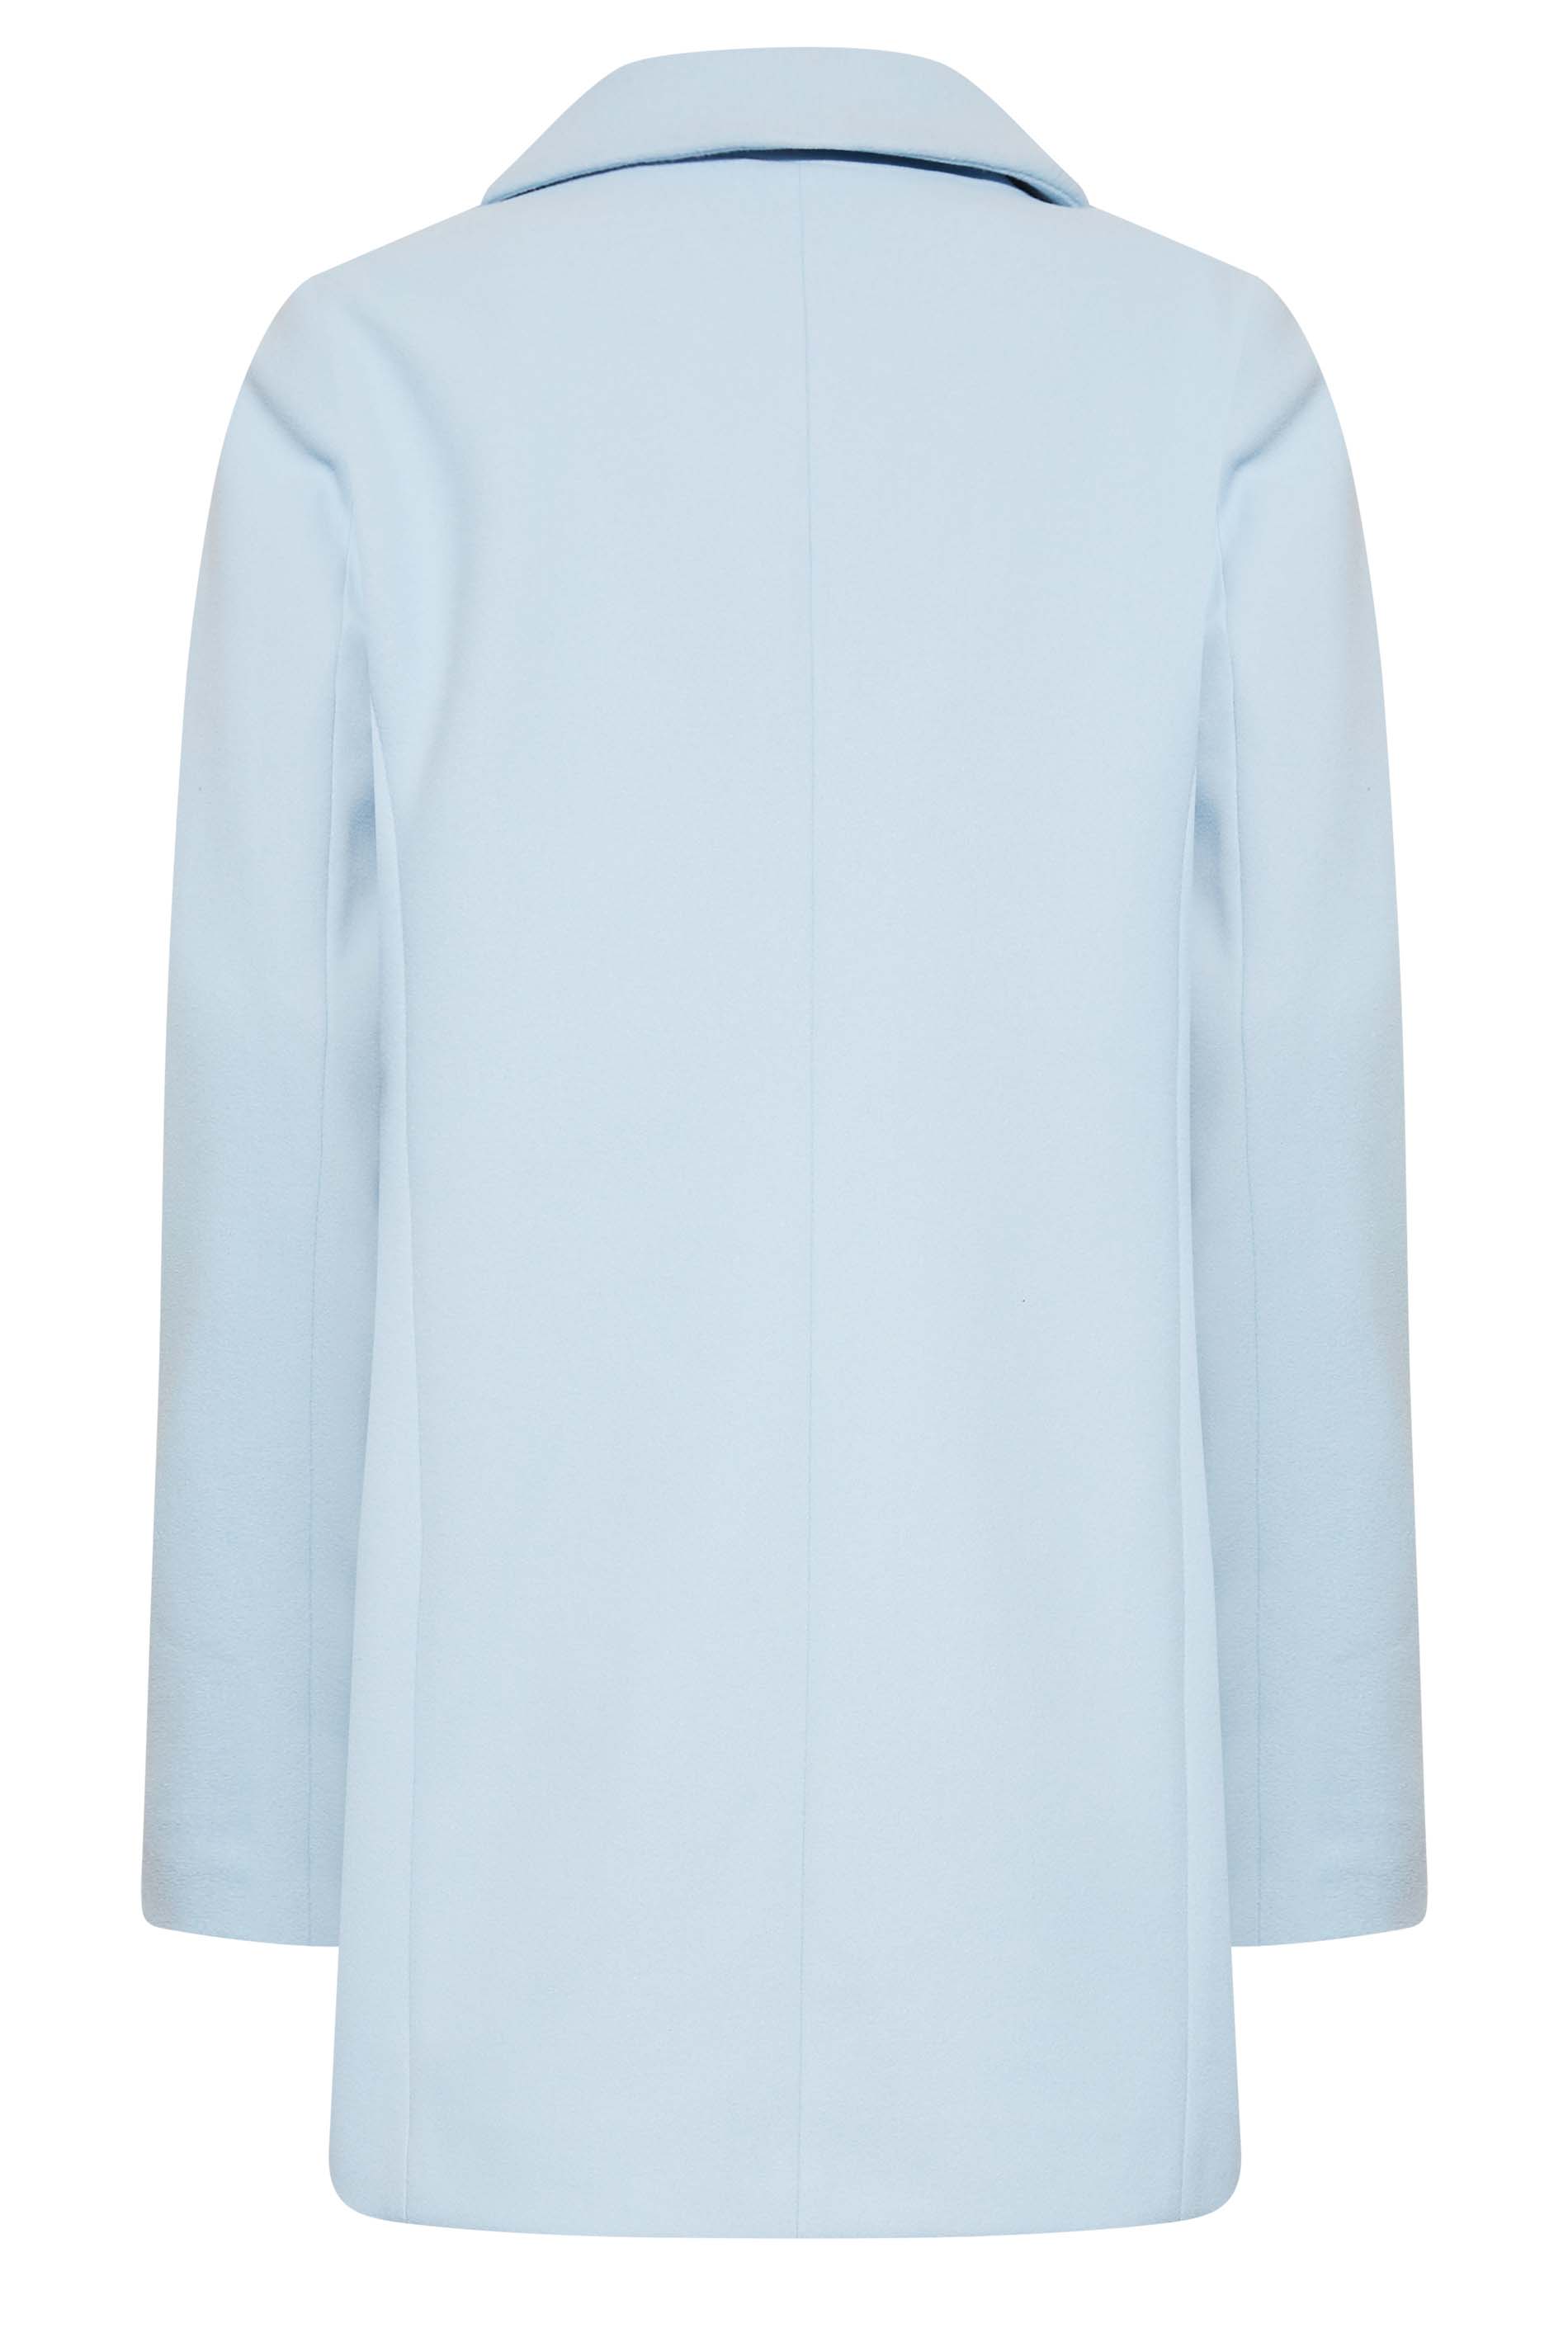 LTS Tall Women's Light Blue Double Breasted Brushed Jacket | Long Tall Sally 3